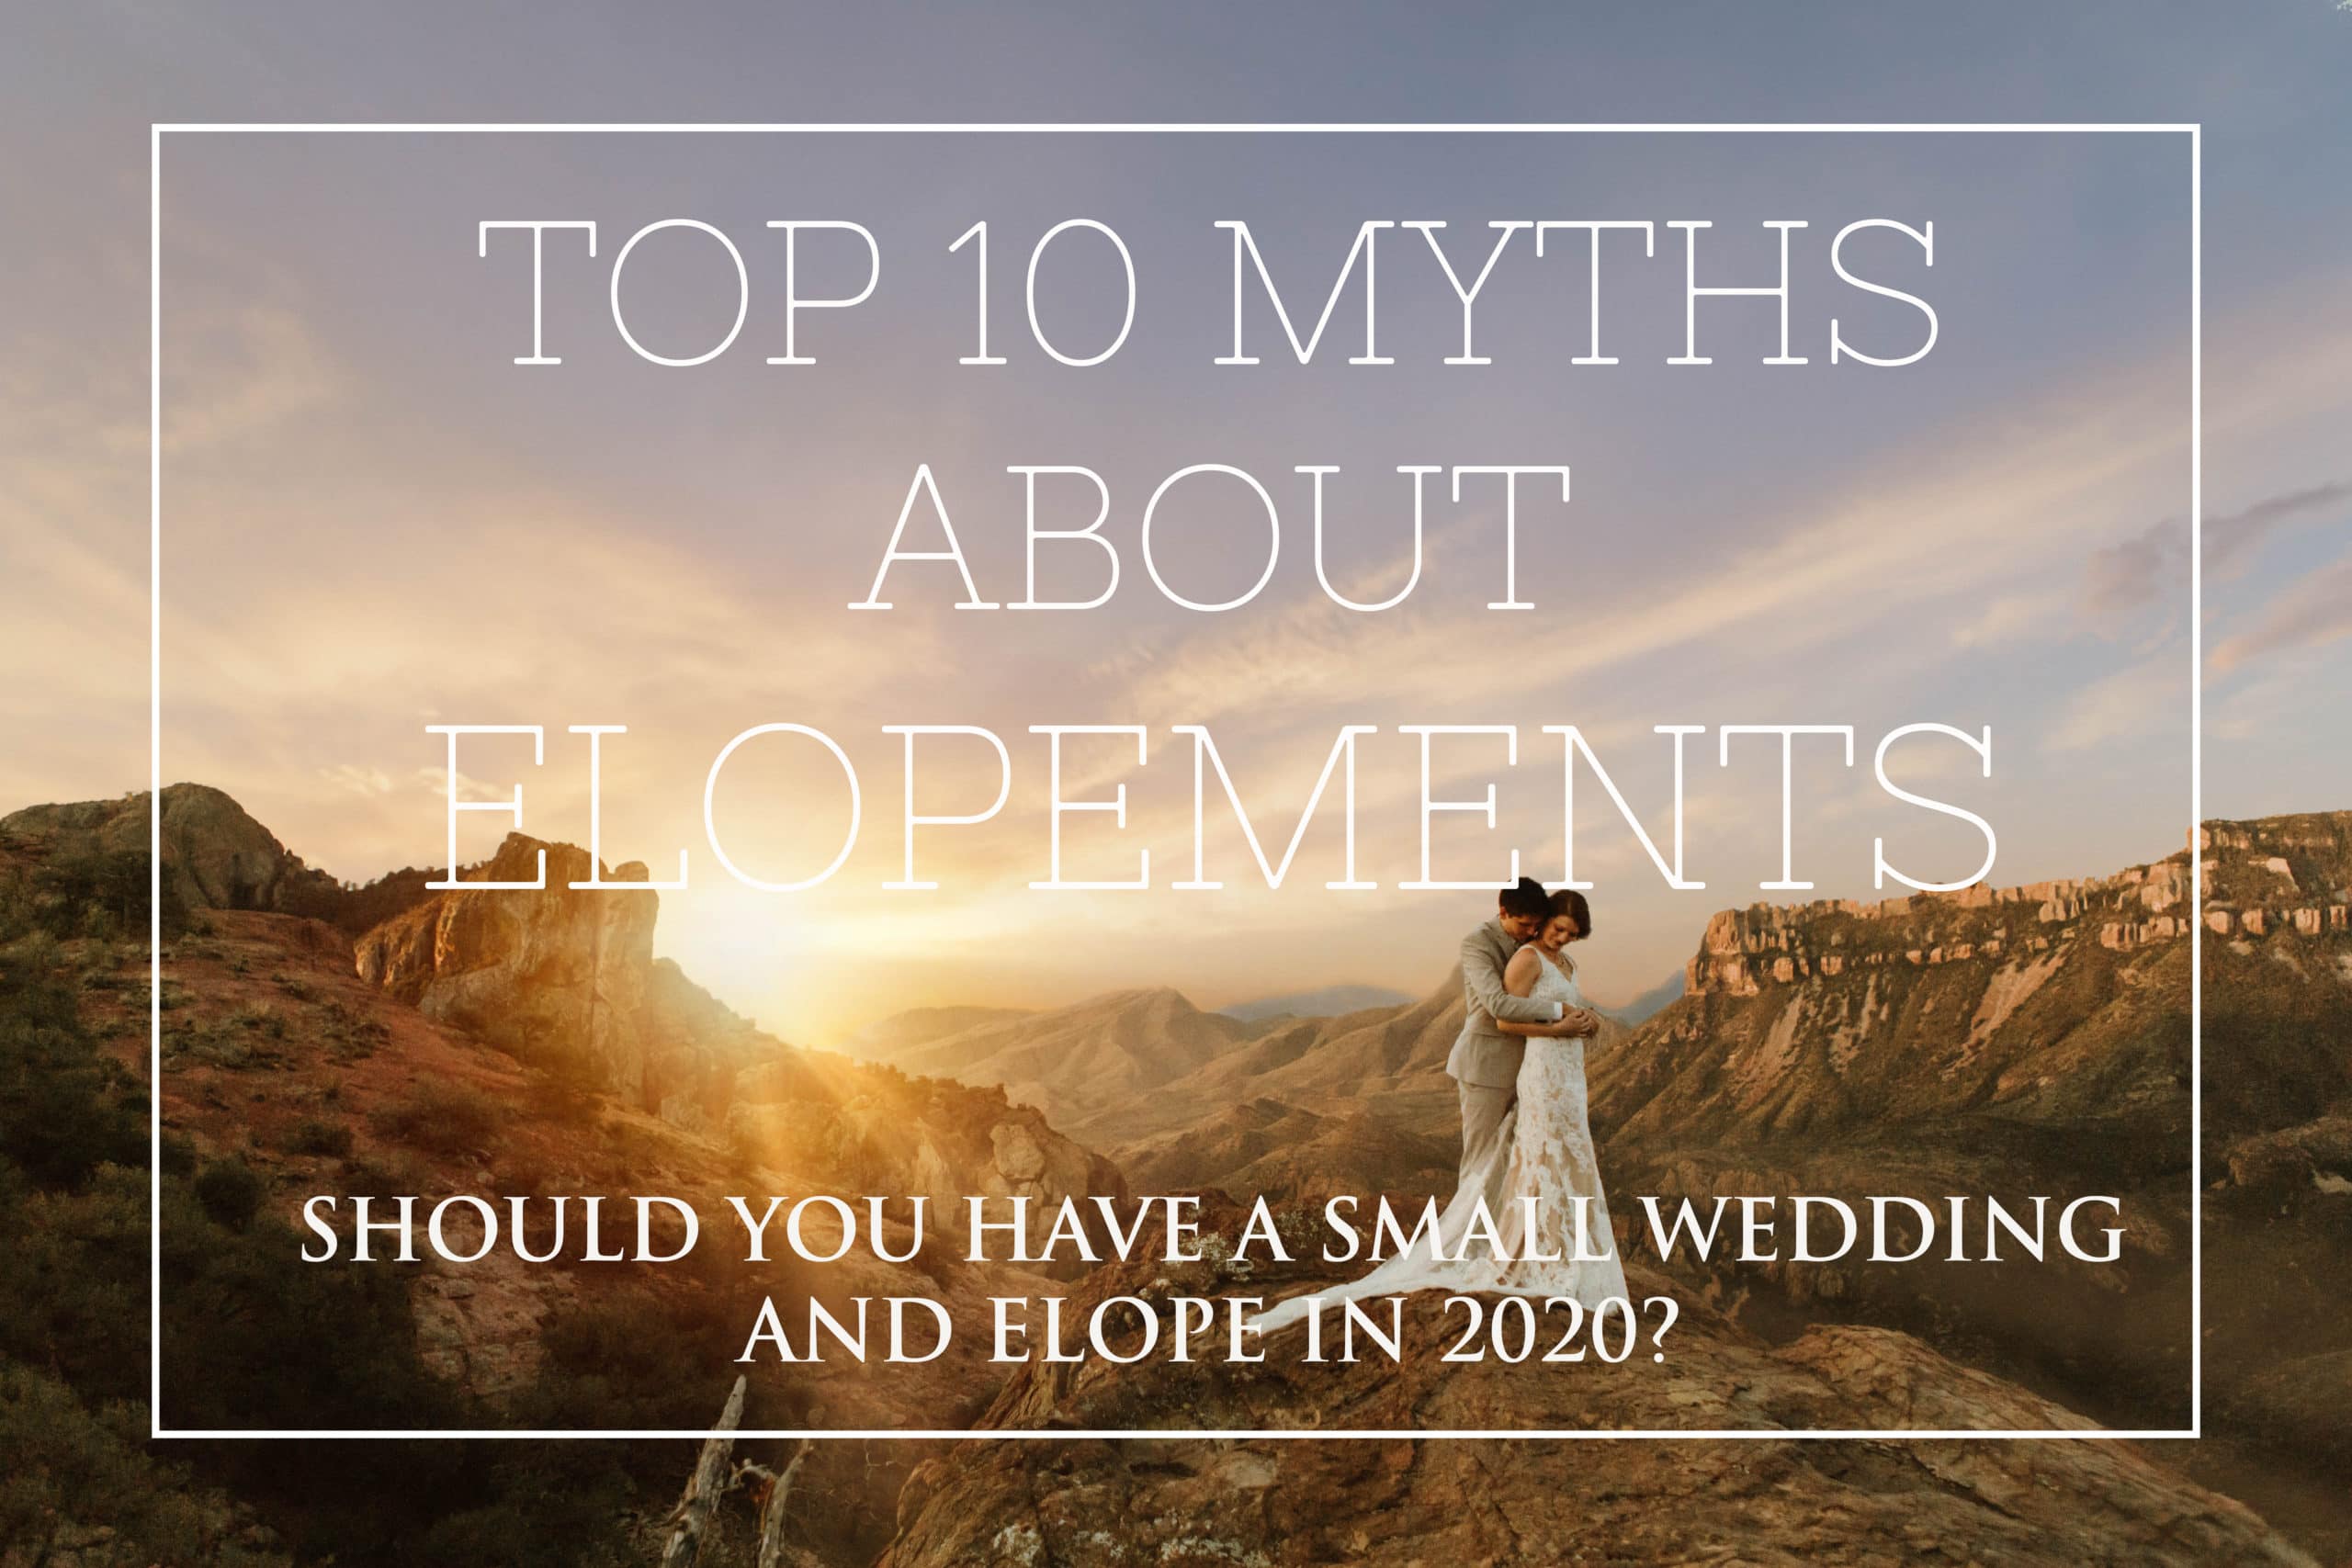 what is an elopement, myths about elopements, how to elope, how to have a small wedding, wedding on a budget, destination wedding, destination elopement, what is a small wedding, wedding in 2020, how to have a wedding, wedding photographer, barbados wedding, beach wedding, beach elopement, big bend national park wedding, elopement dresses, how to travel for a wedding